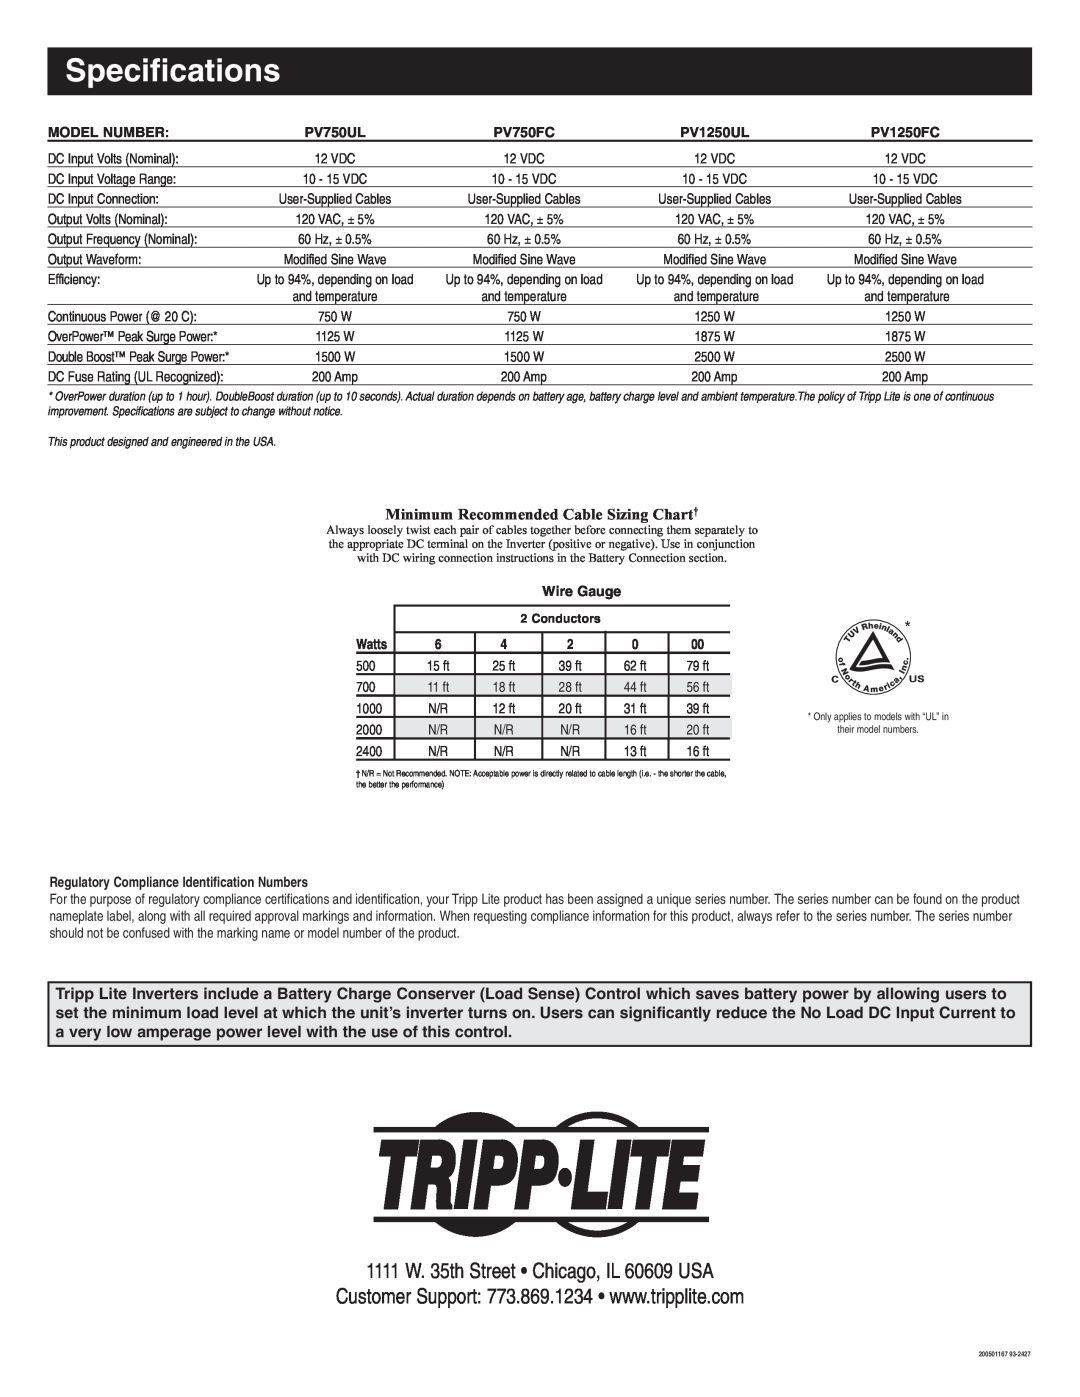 Tripp Lite DC-to-AC Inverter Specifications, 1111 W. 35th Street Chicago, IL 60609 USA, Model Number, Wire Gauge 